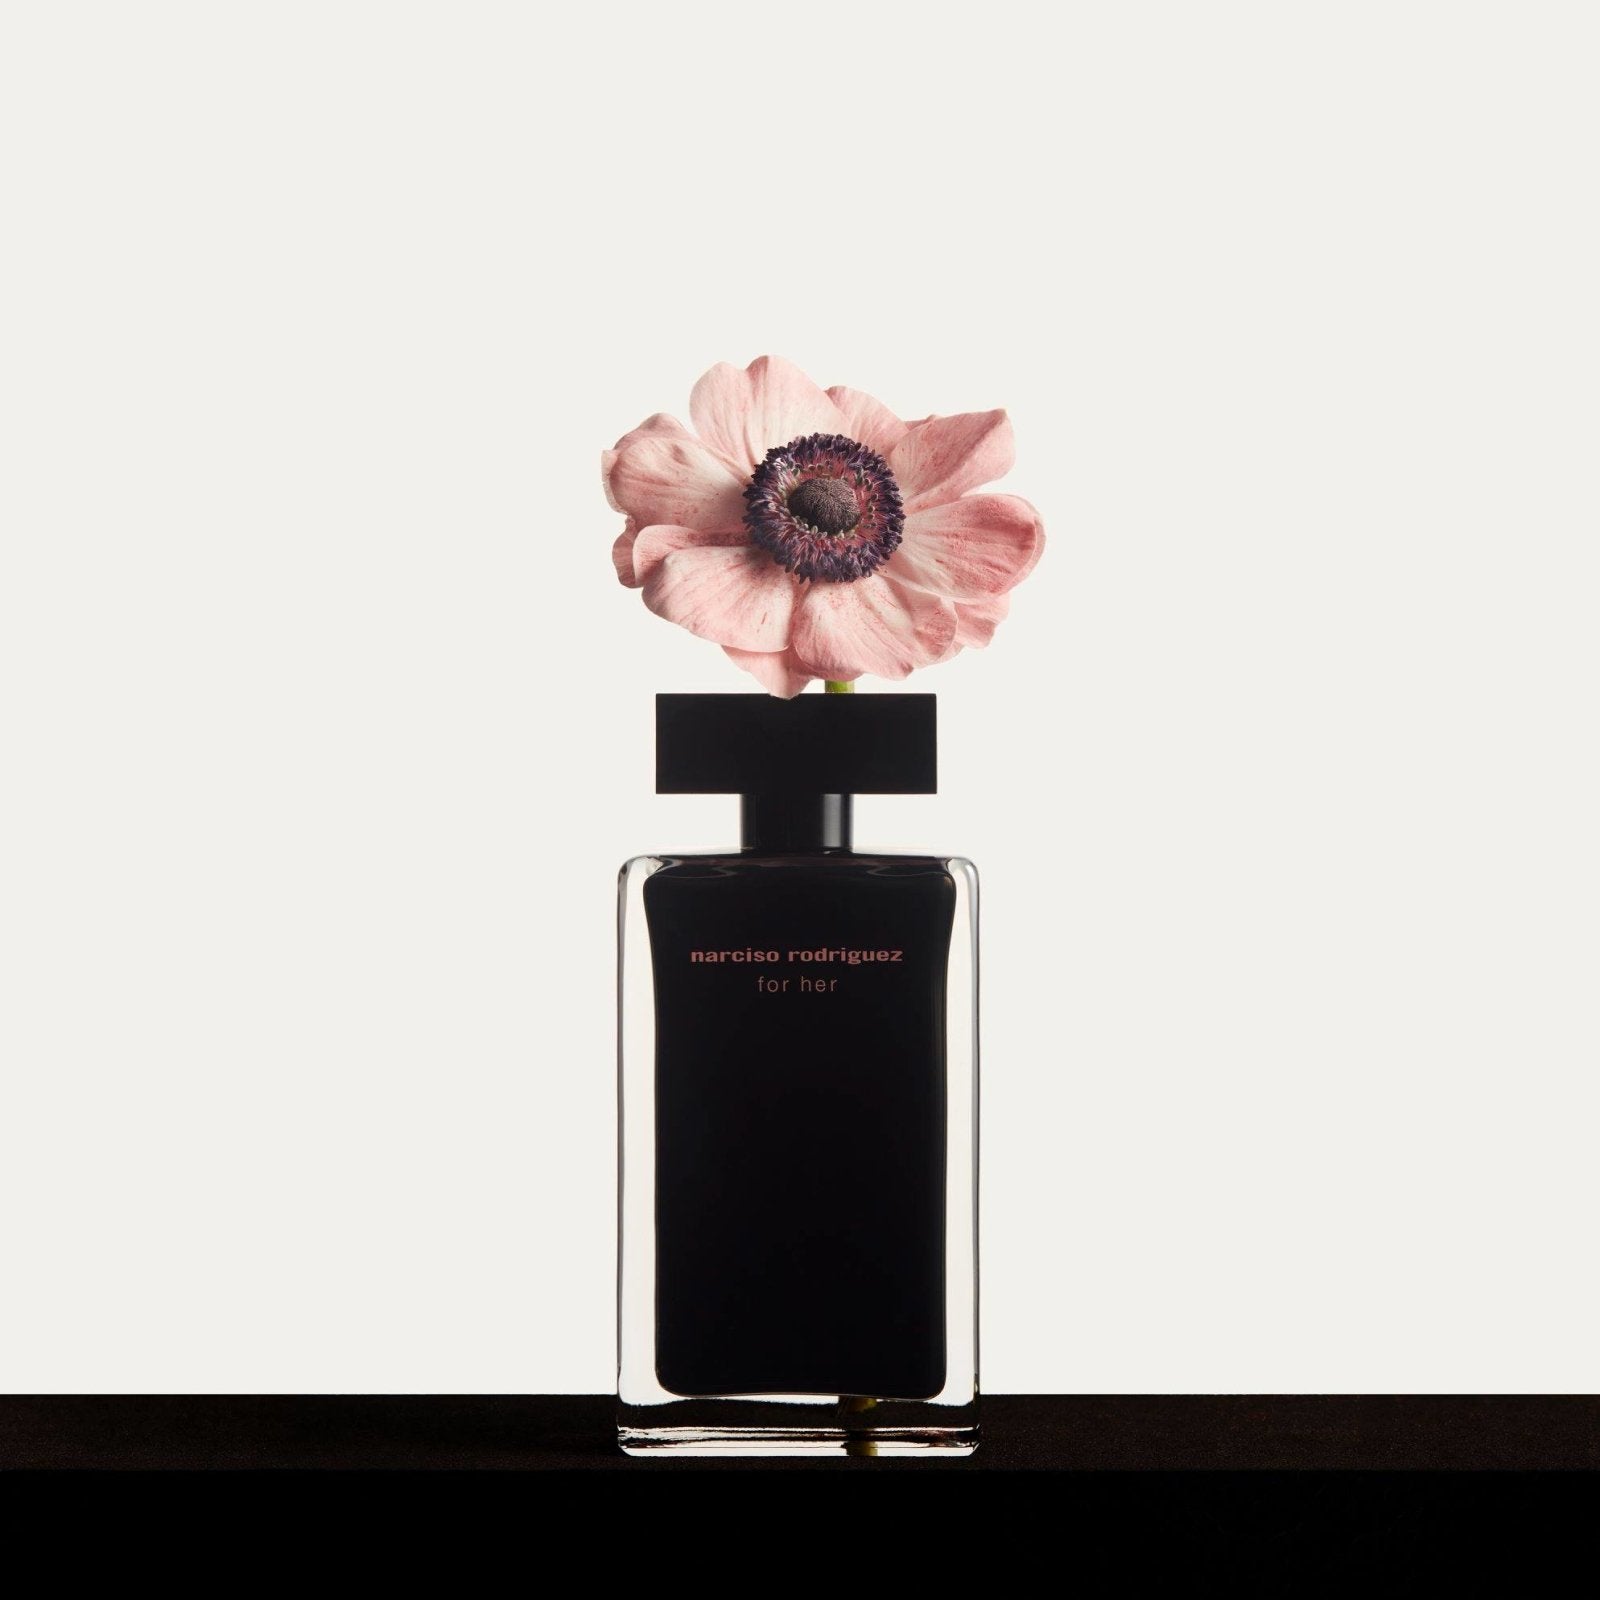 Narciso Rodriguez For Her EDT Gift Set - My Perfume Shop Australia